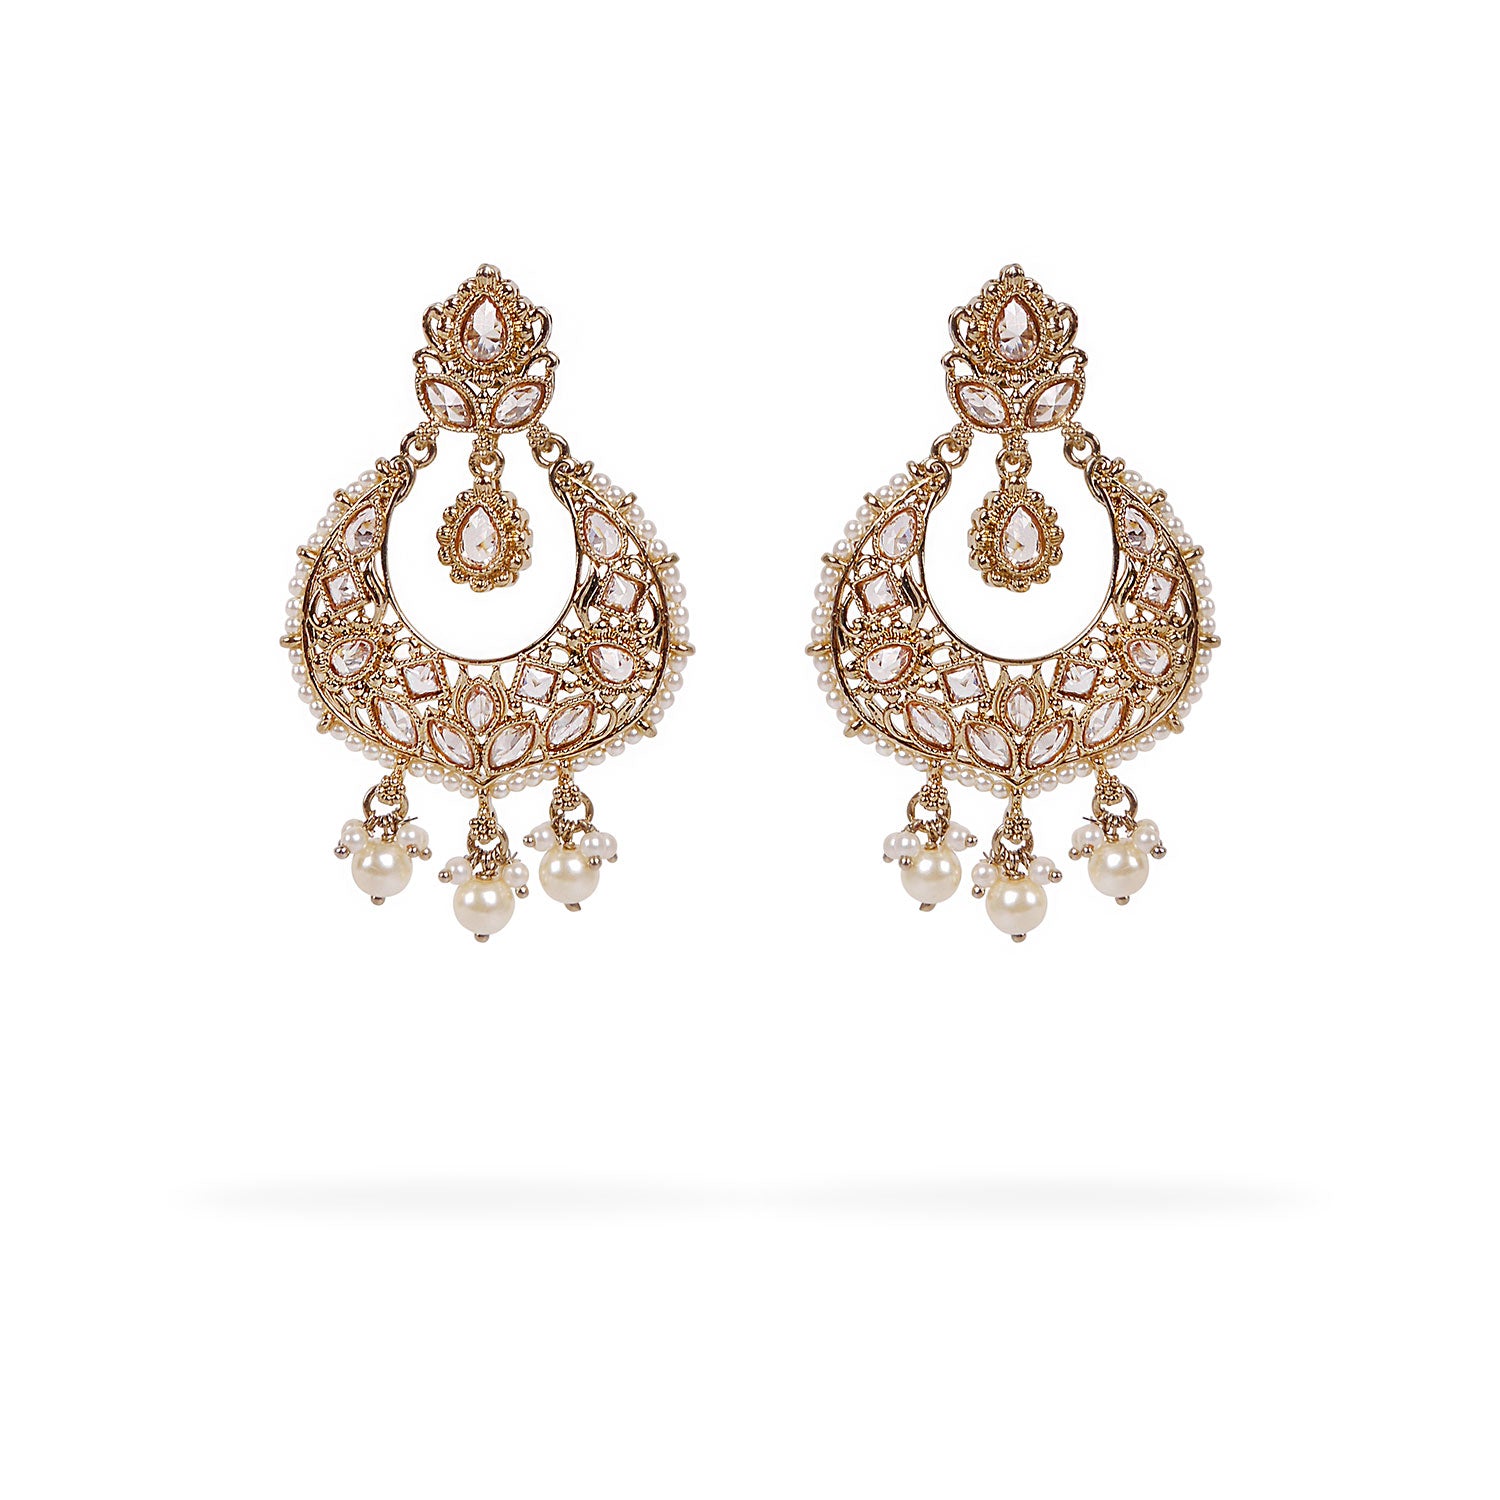 Veera Chandbali Earrings in Pearl and Antique Gold